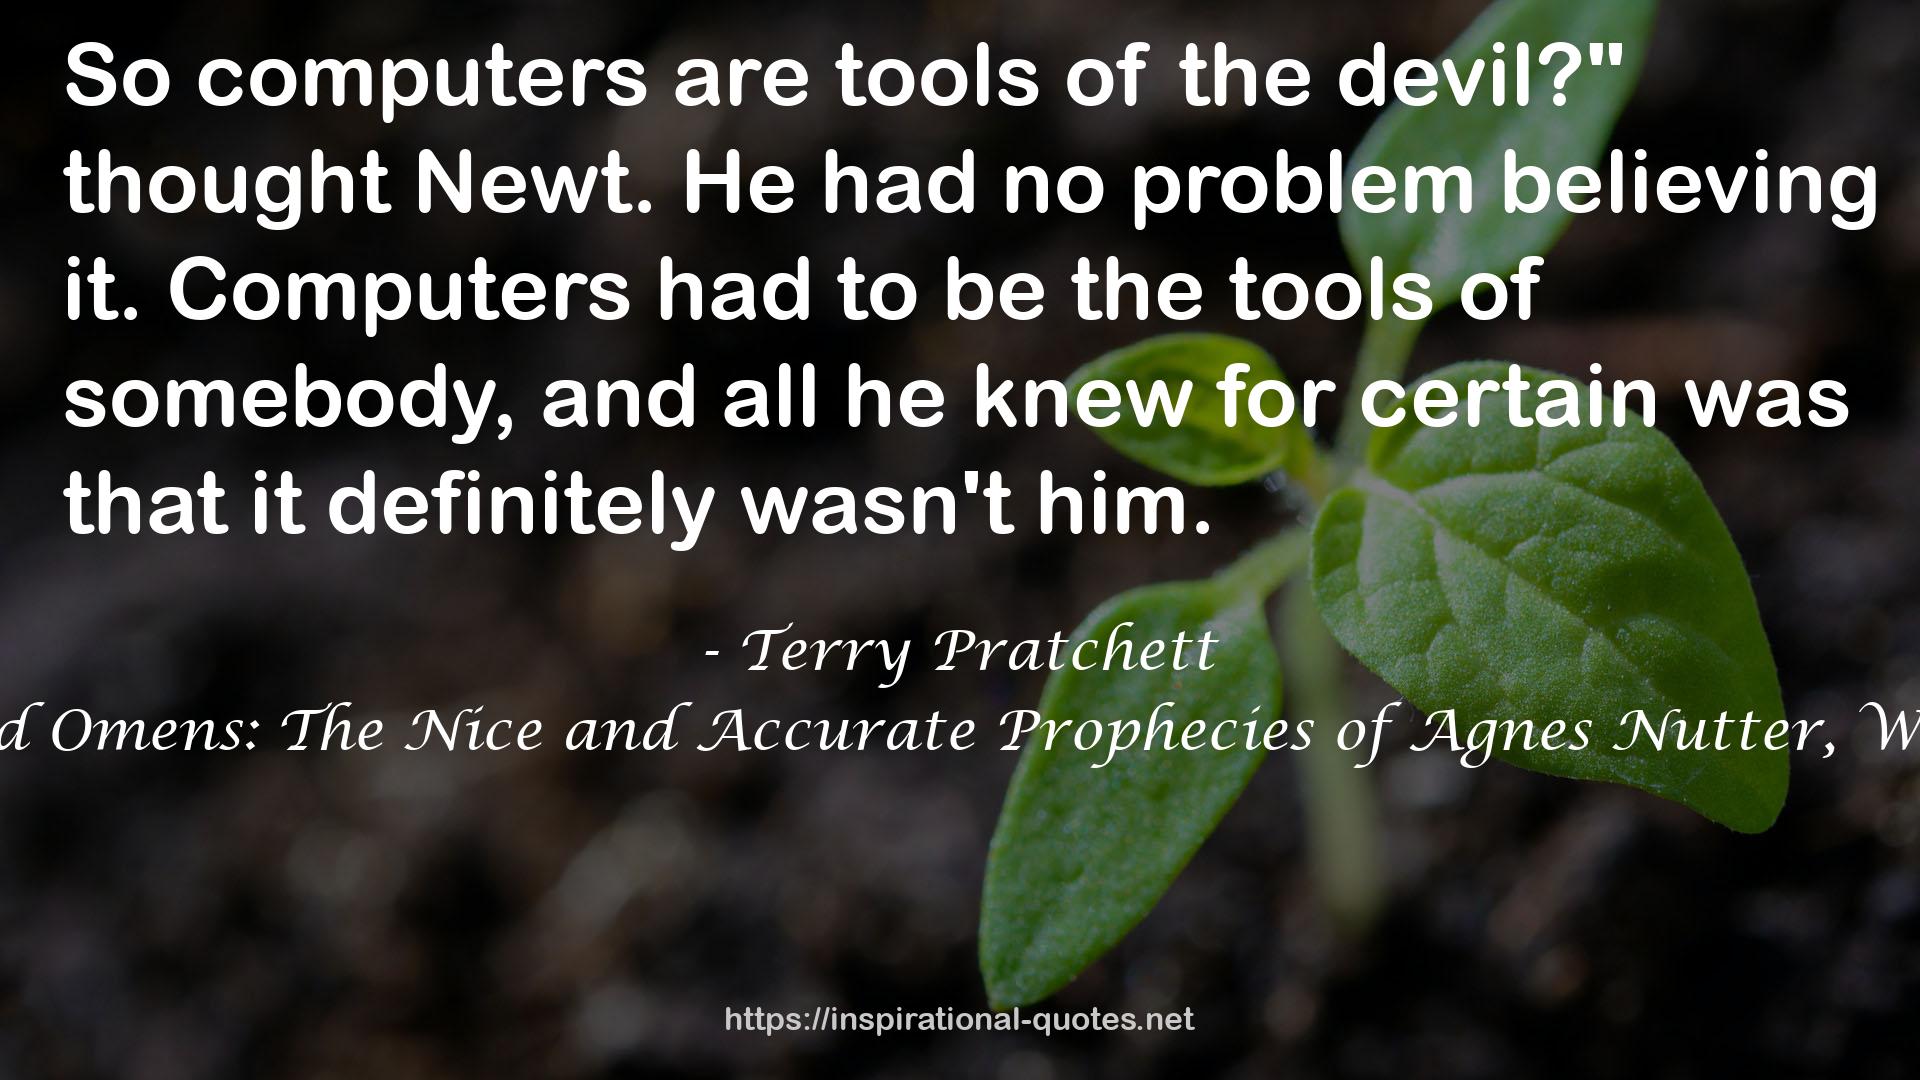 Good Omens: The Nice and Accurate Prophecies of Agnes Nutter, Witch QUOTES